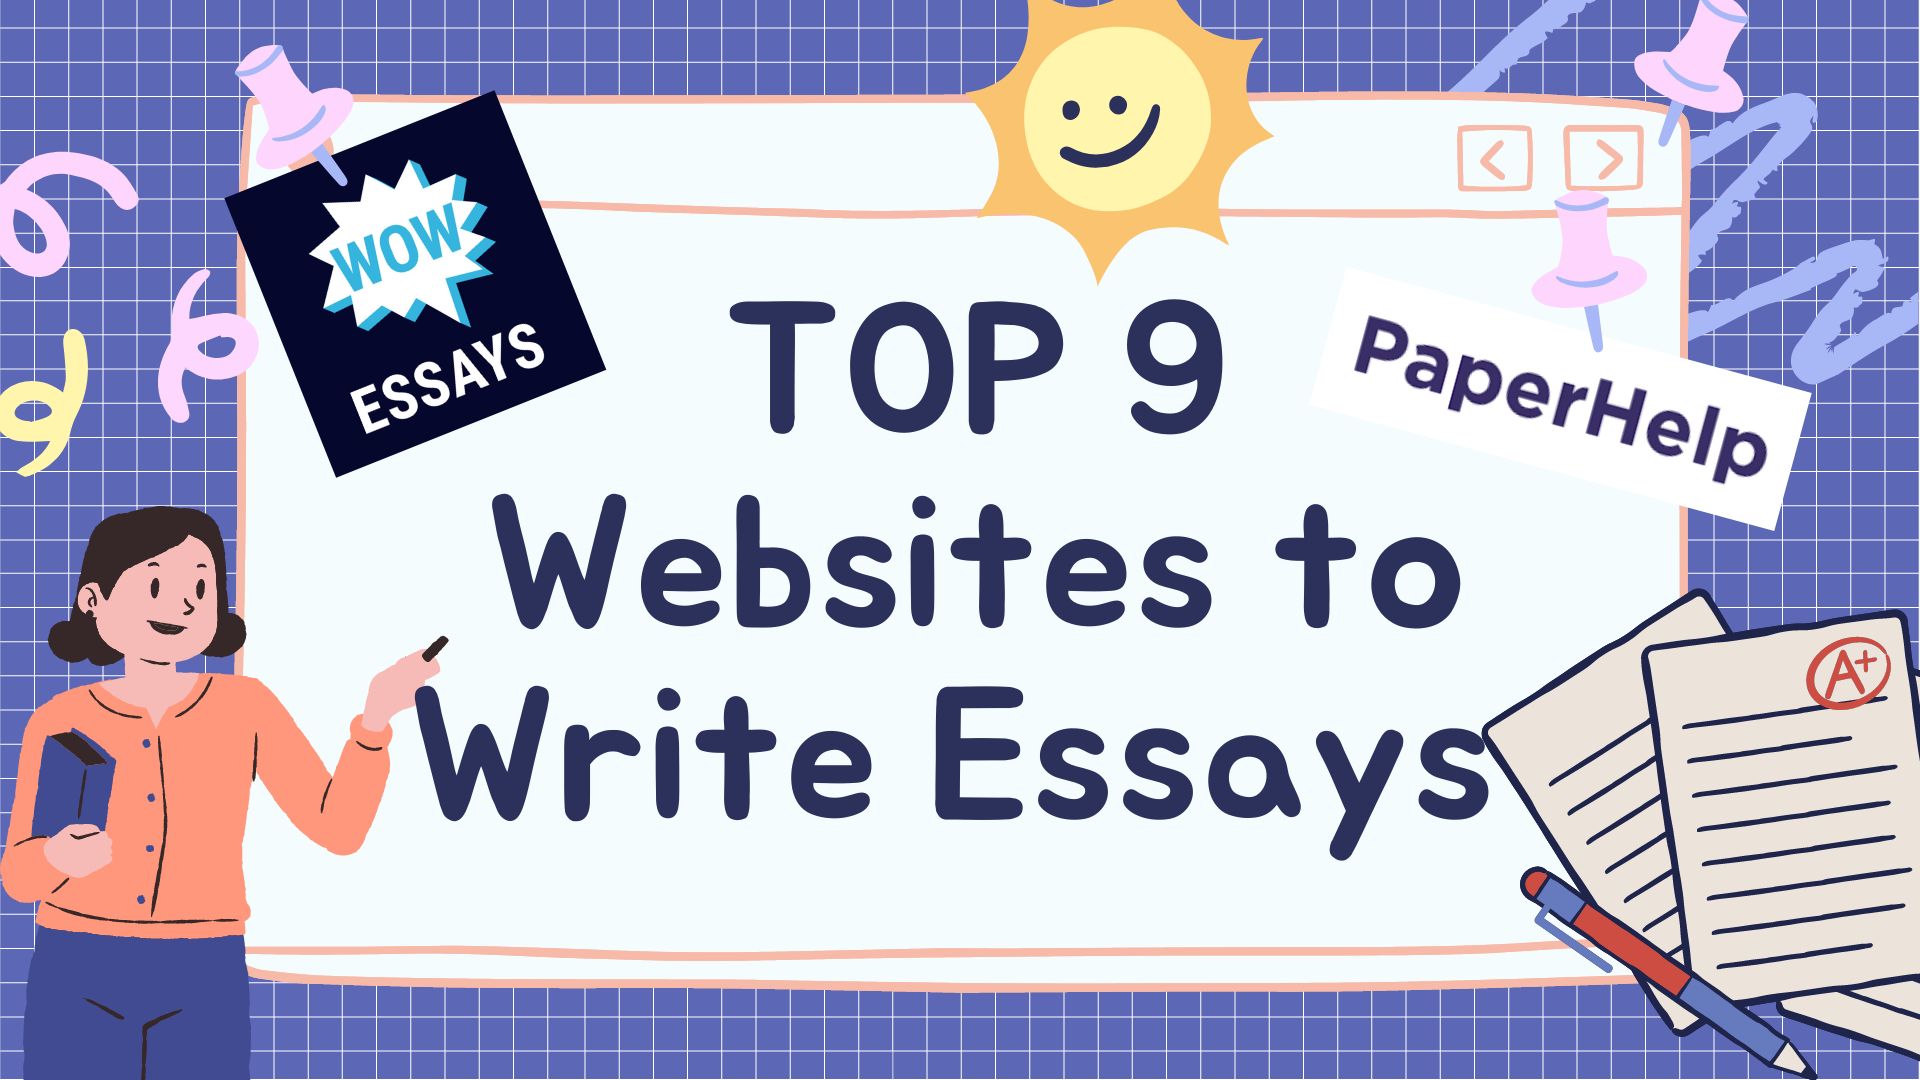 TOP 9 Websites to Write Essays and Make Them Great Every Time